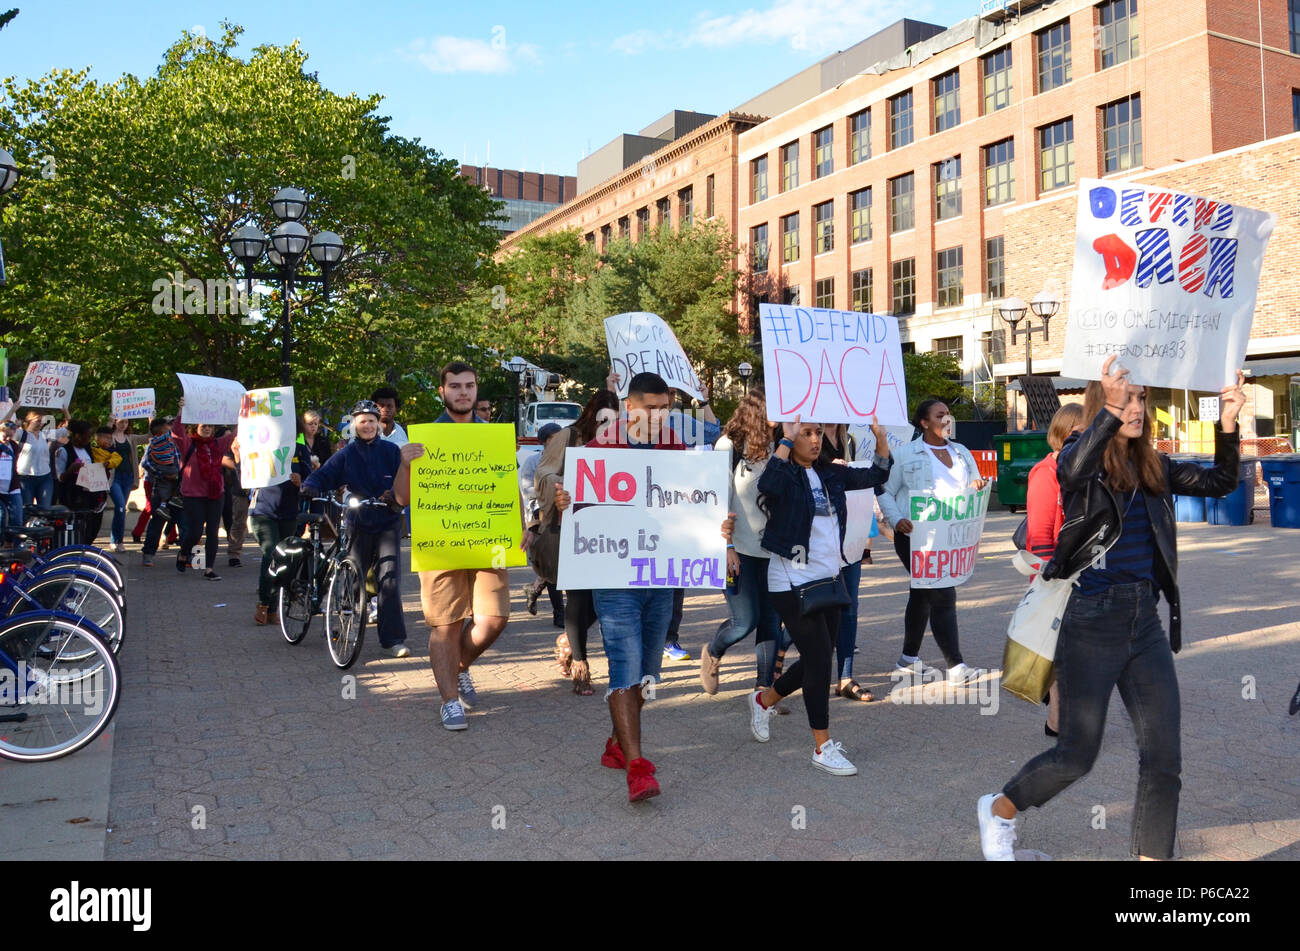 ANN ARBOR, MI / USA - SEPTEMBER 8, 2017: Protesters show their support for dreamers at a pro - DACA rally at the University of Michigan. Stock Photo